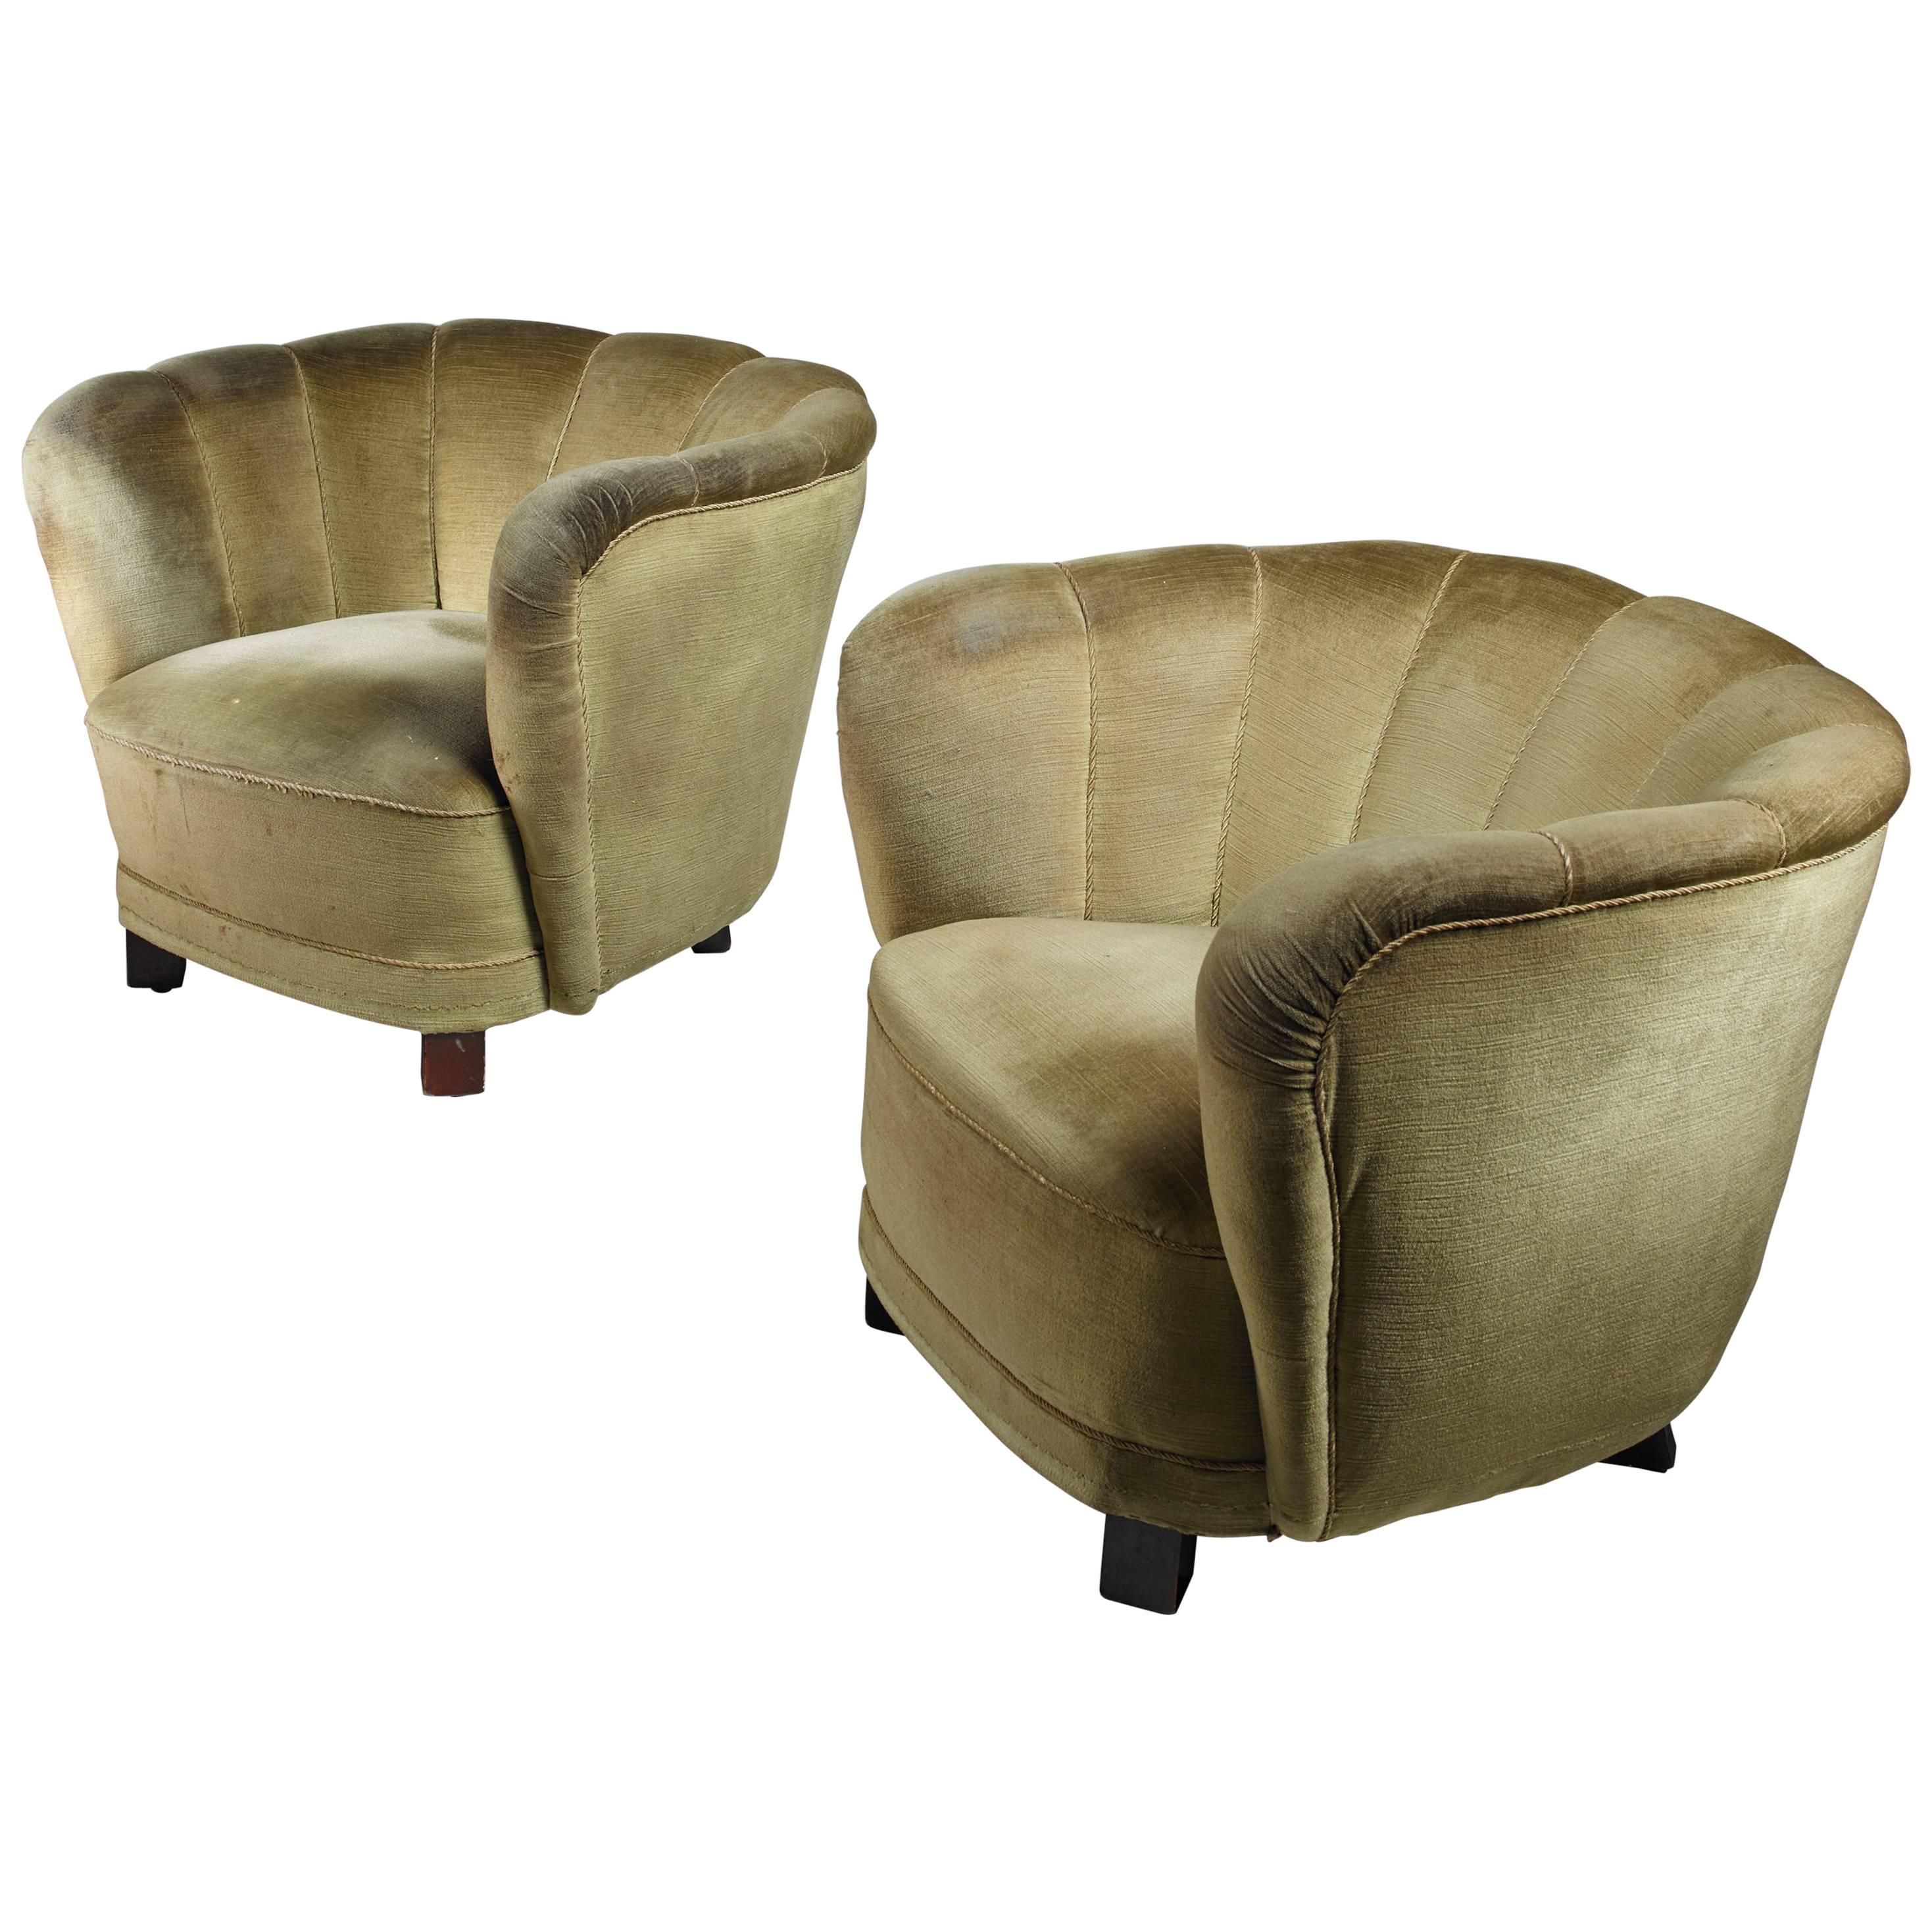 Pair of Club Chairs with Green Velour Upholstery, Denmark, 1940s